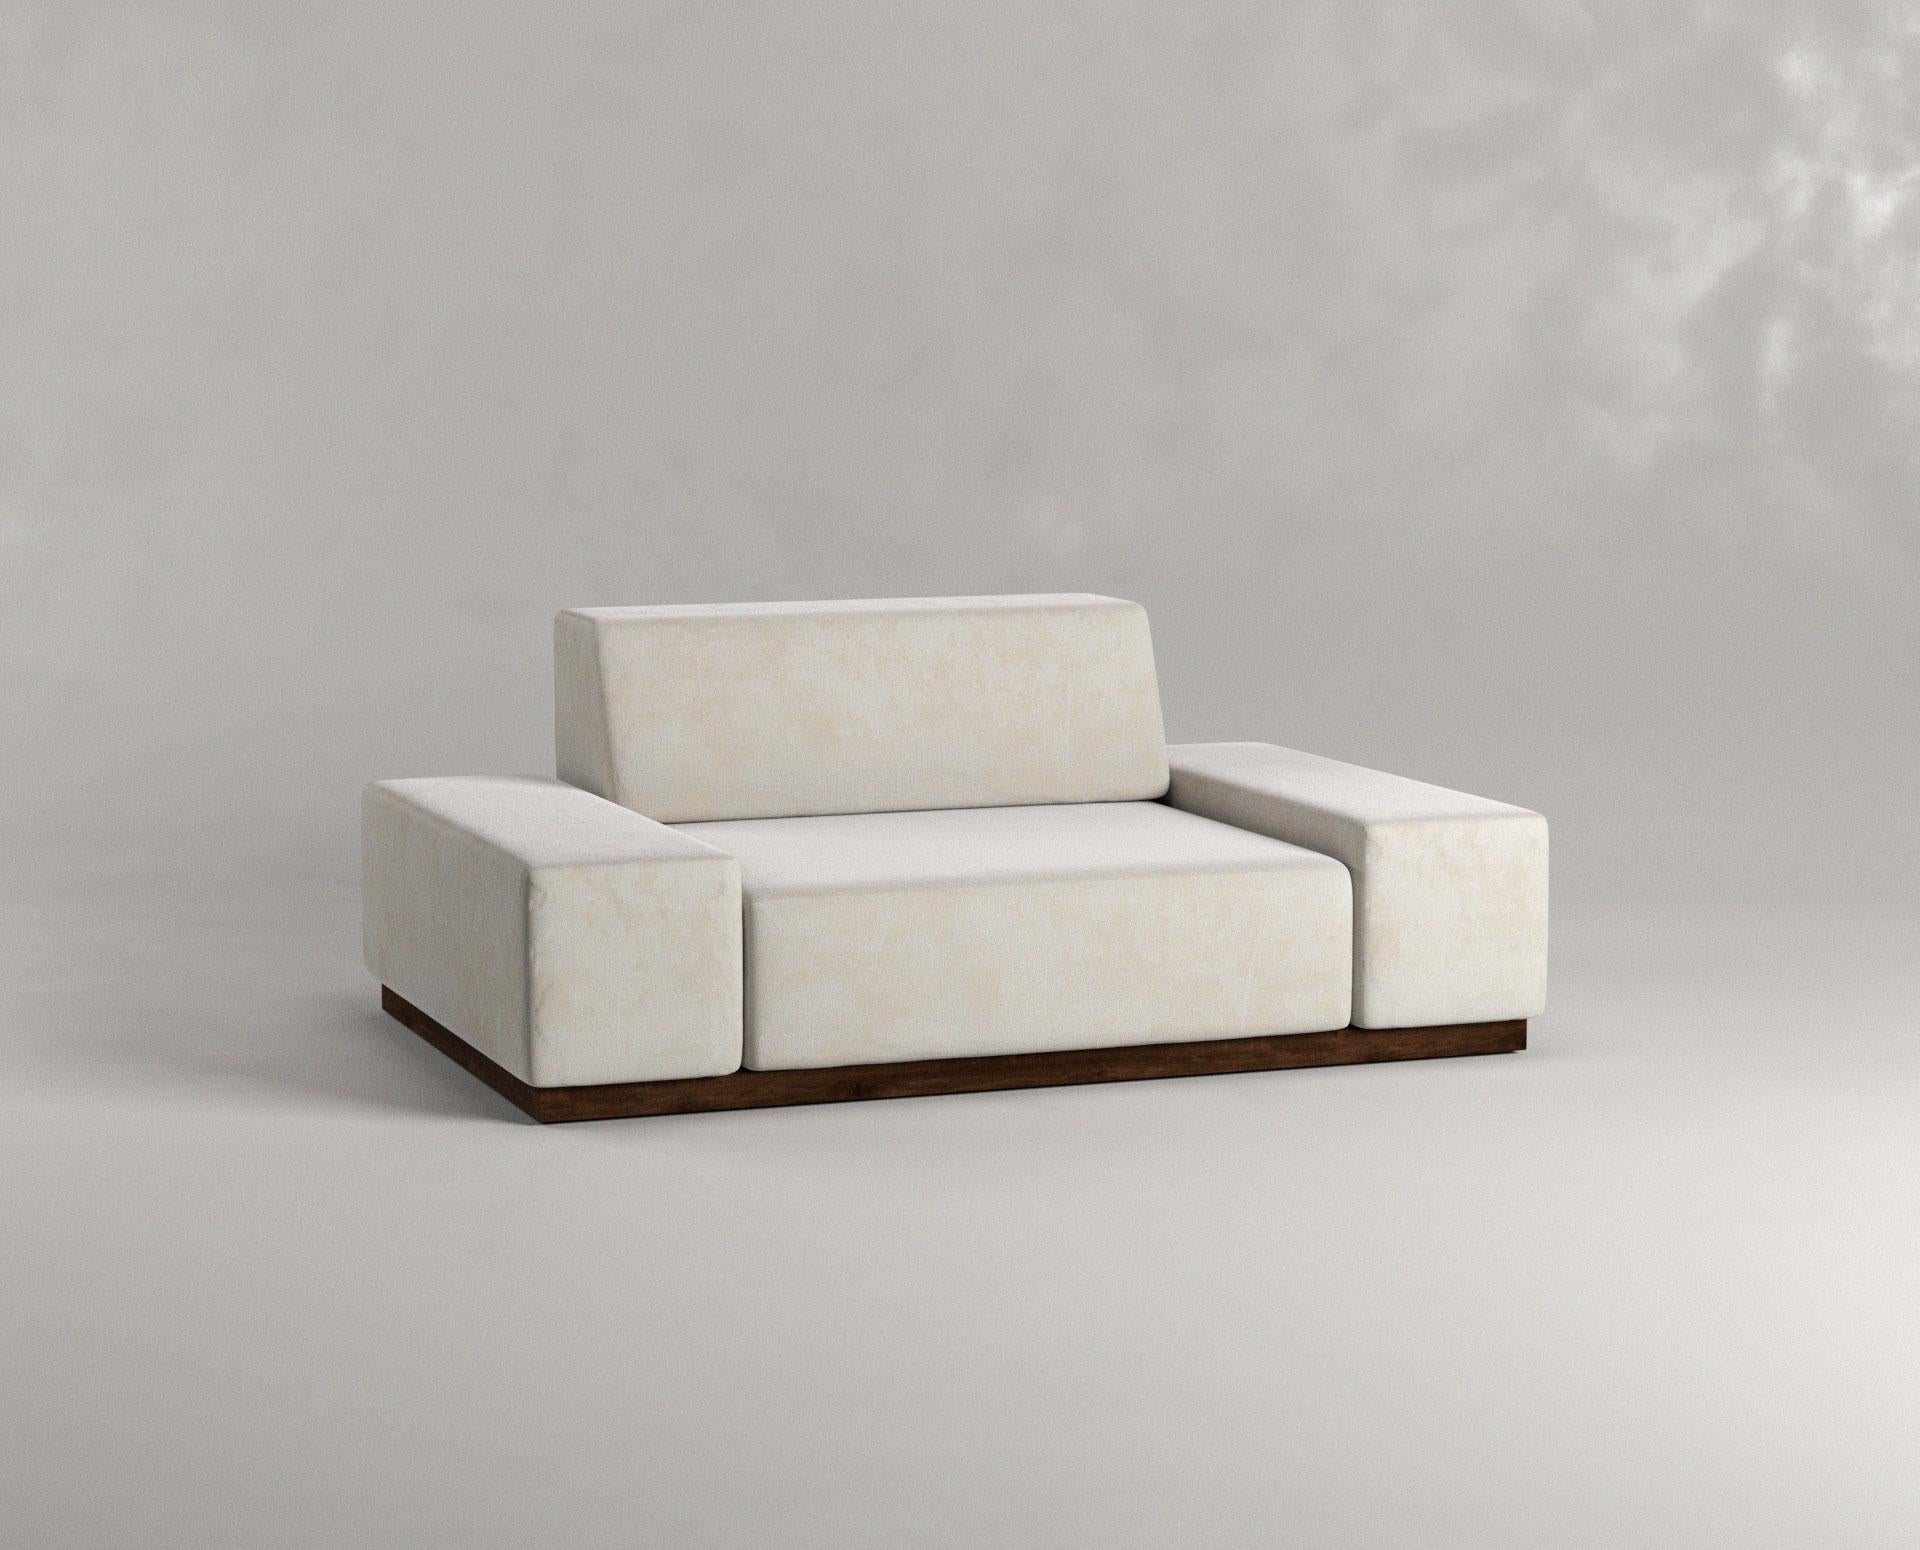 Nube Sofa One Seater White by Siete Studio
Dimensions: D150 x W100 x H60 cm.
Materials: Walnut, cushions, upholstery.

Characterised by its round edges and soft white cushions, Nube carries the comforting sensation of falling into a cloud.
The